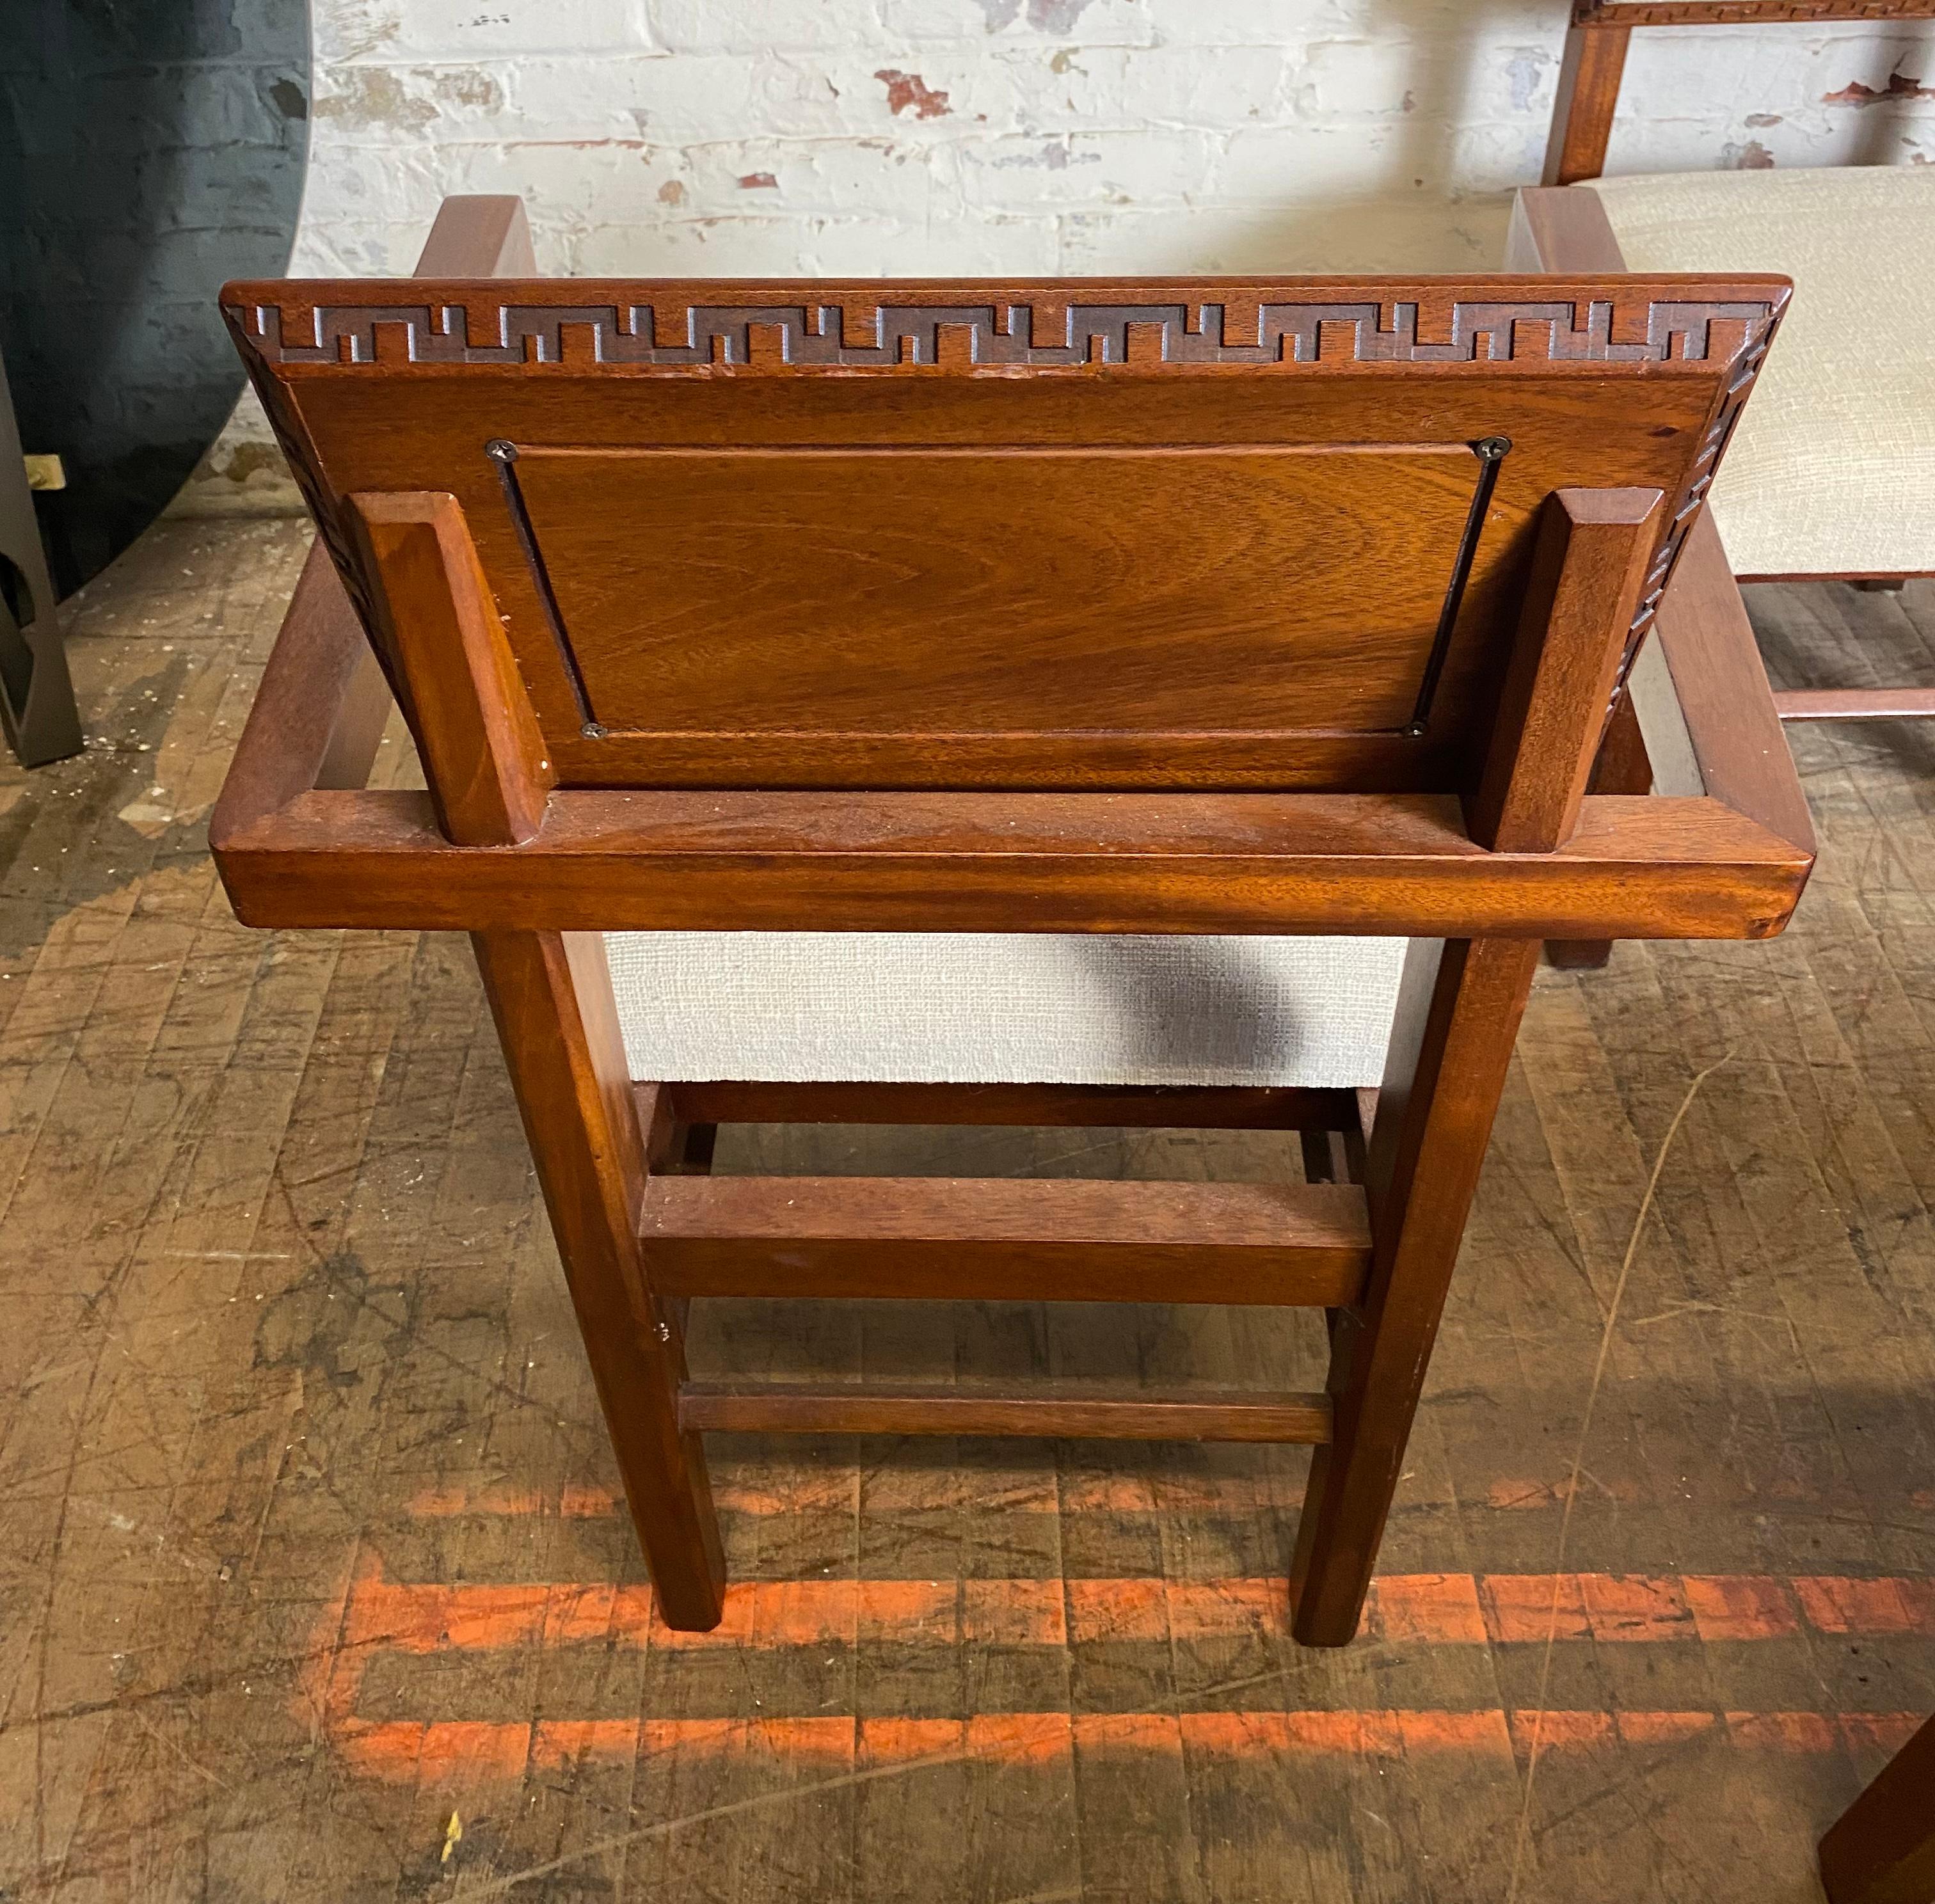 Stunning set of six Frank lloyd Wright angular Taliesin chairs in mahogany, whose seat backs feature Greek key dentil trim. Wood frames in wonderful original condition,,,Original fabric upholstery can use a cleaning,,, The two armchairs measures: